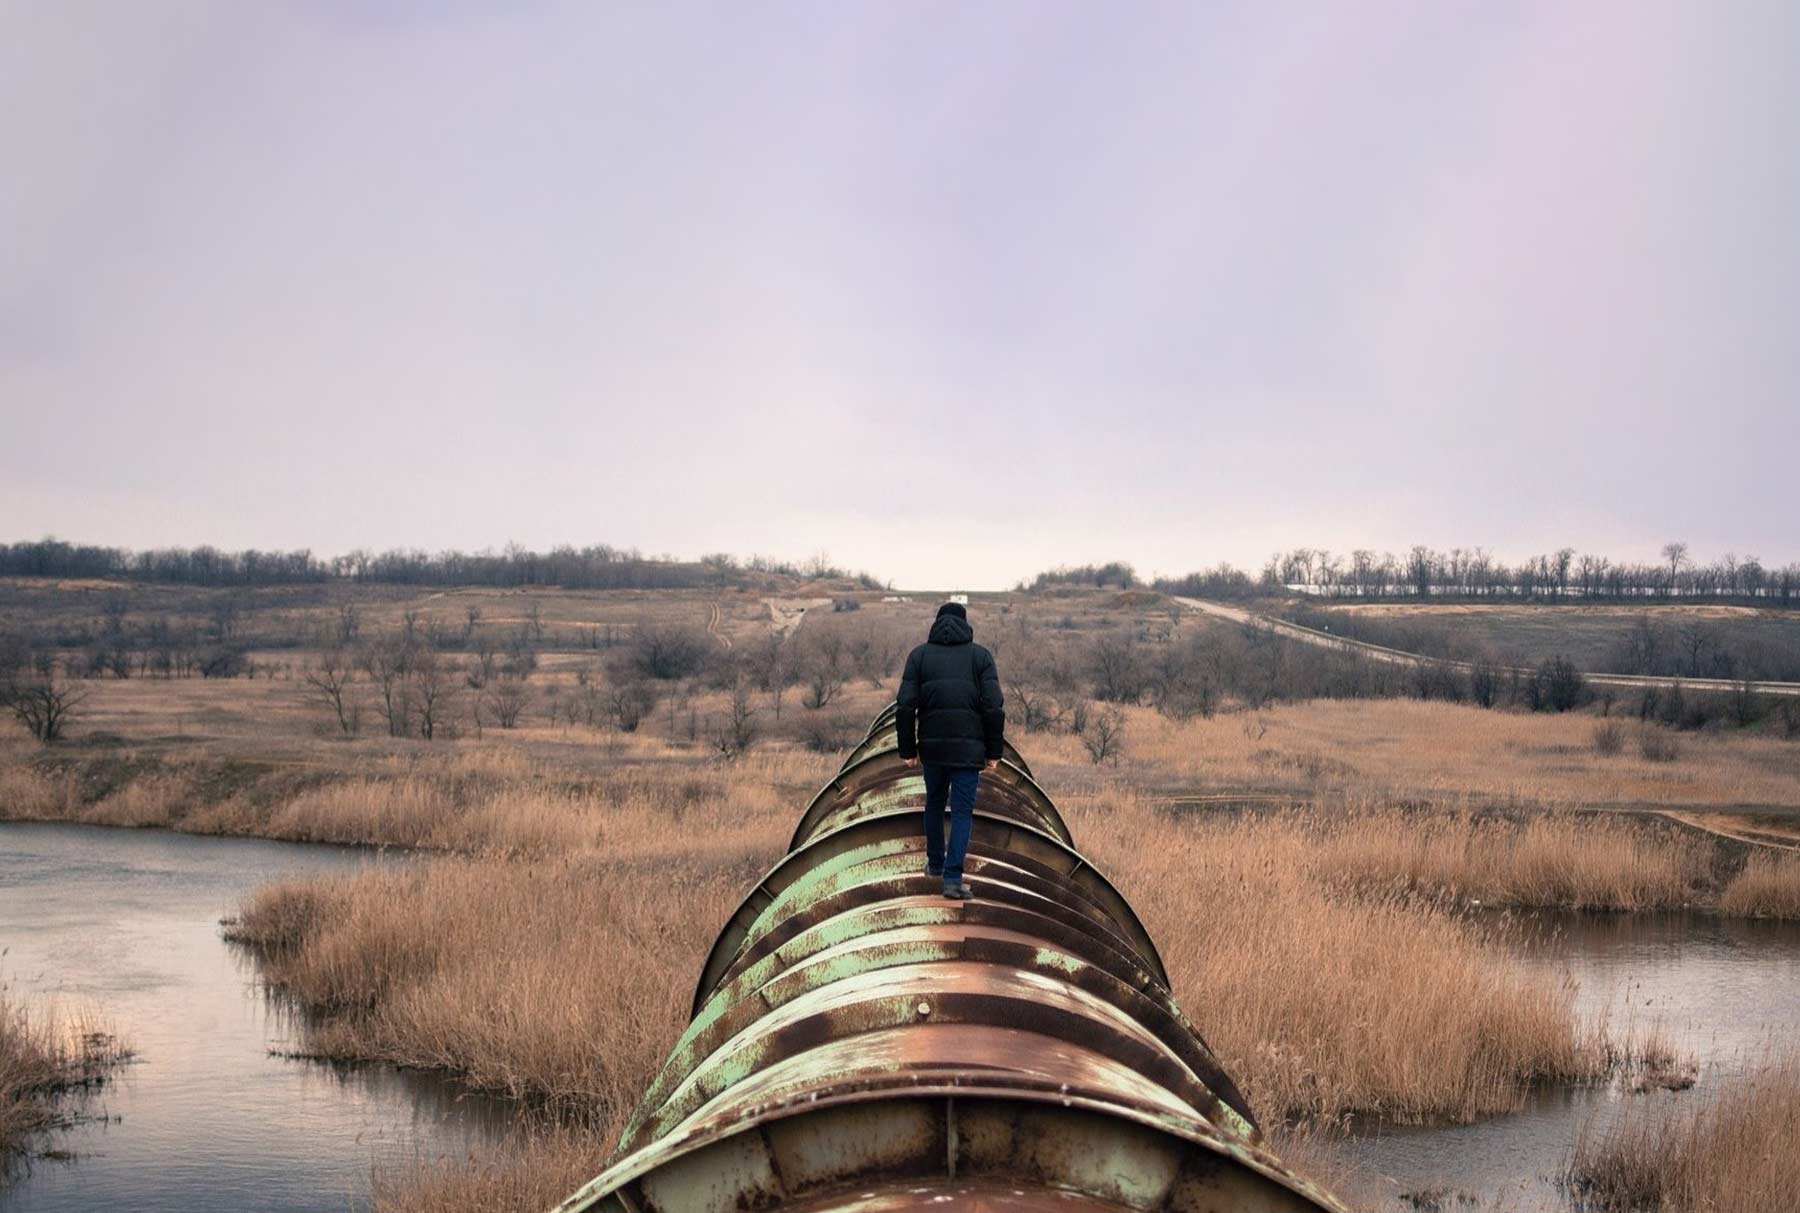 A Man walking away from the camera, on a large pipe.